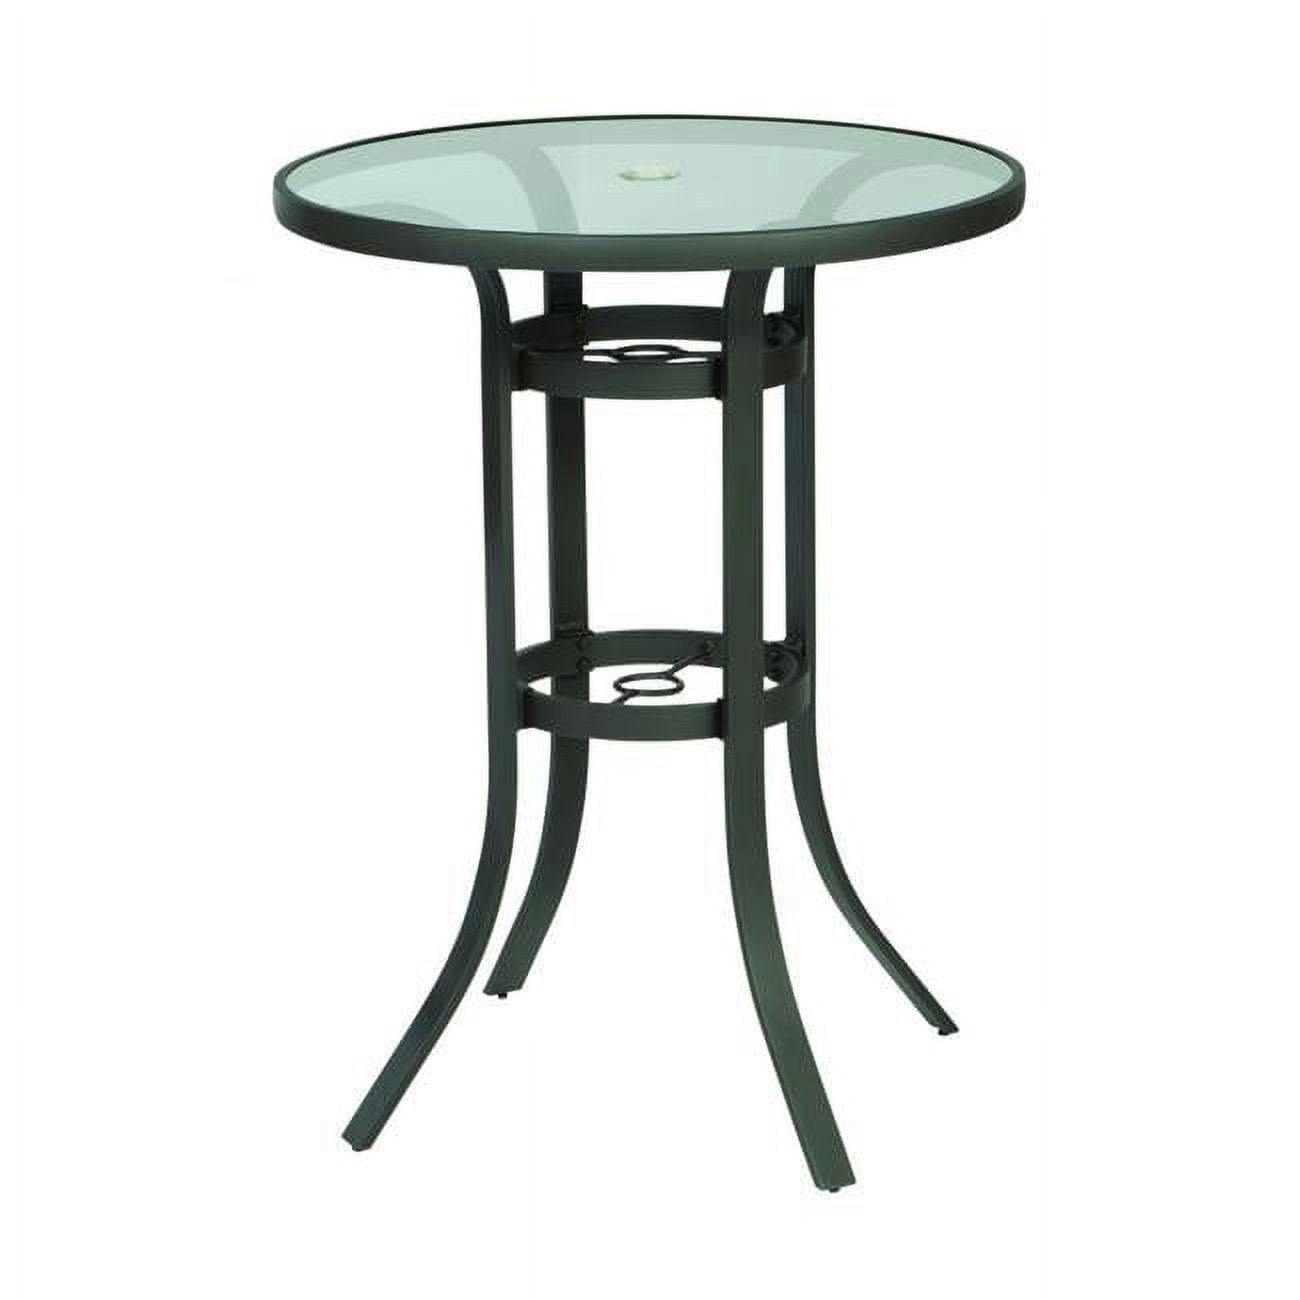 Icarus 30" Brown Aluminum Frame Round Glass Balcony Table